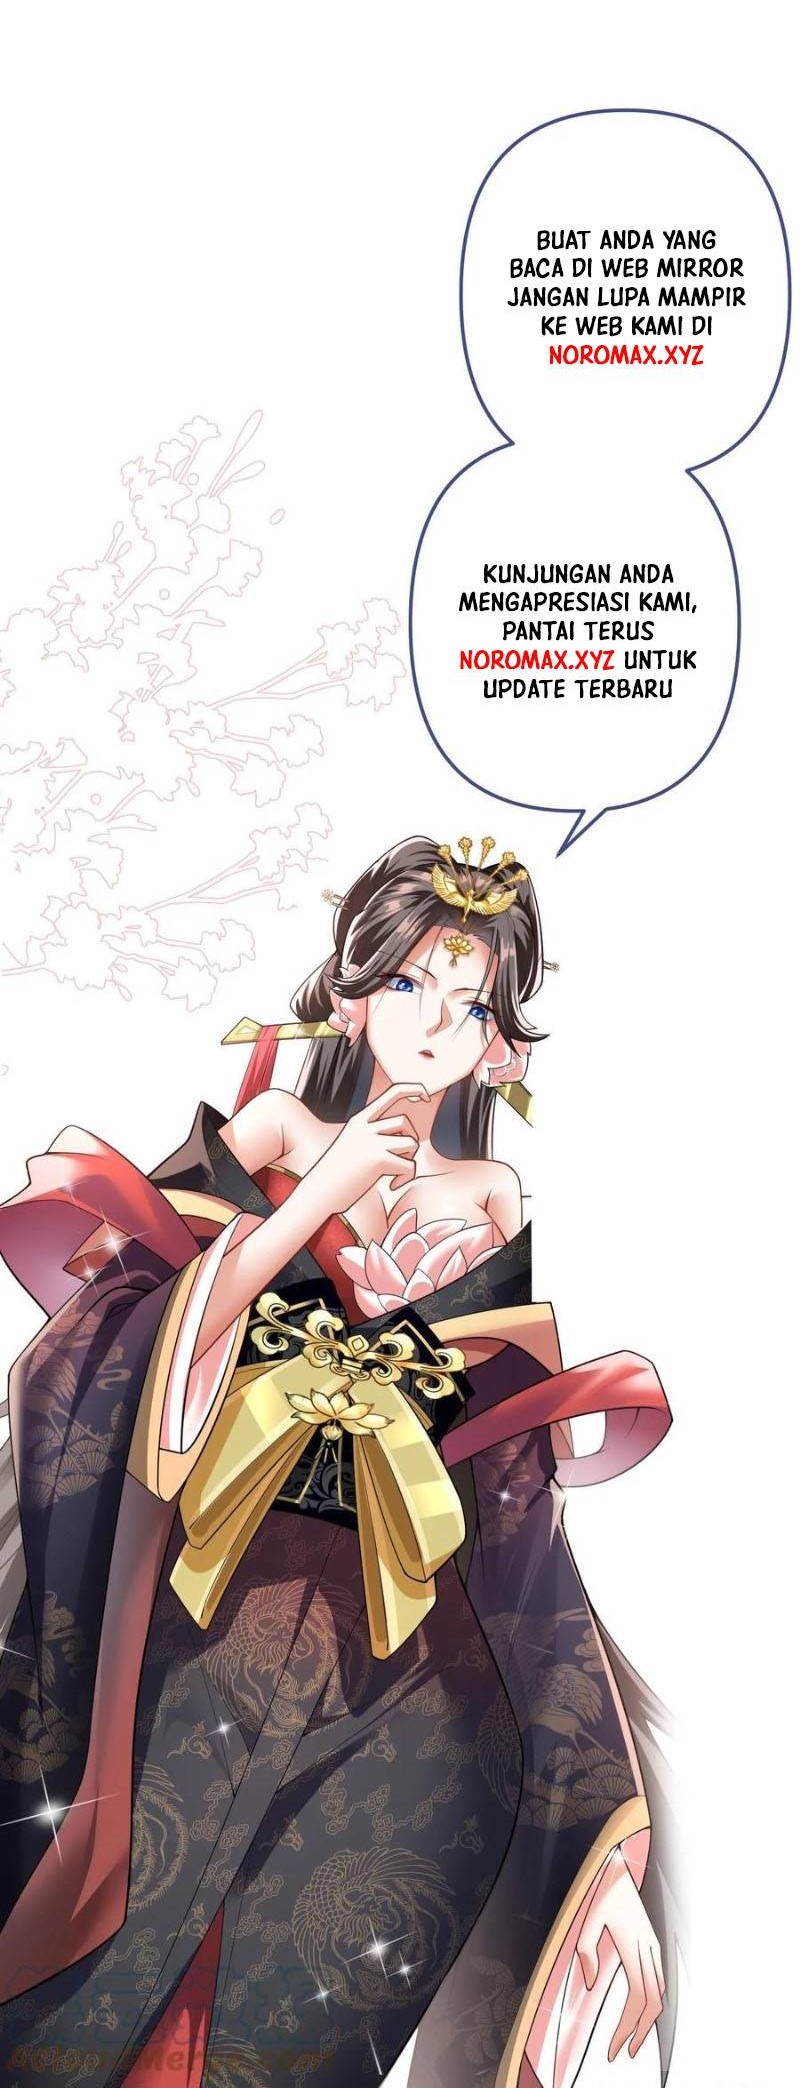 It’s Over! The Queen’s Soft Rice Husband is Actually Invincible Chapter 122